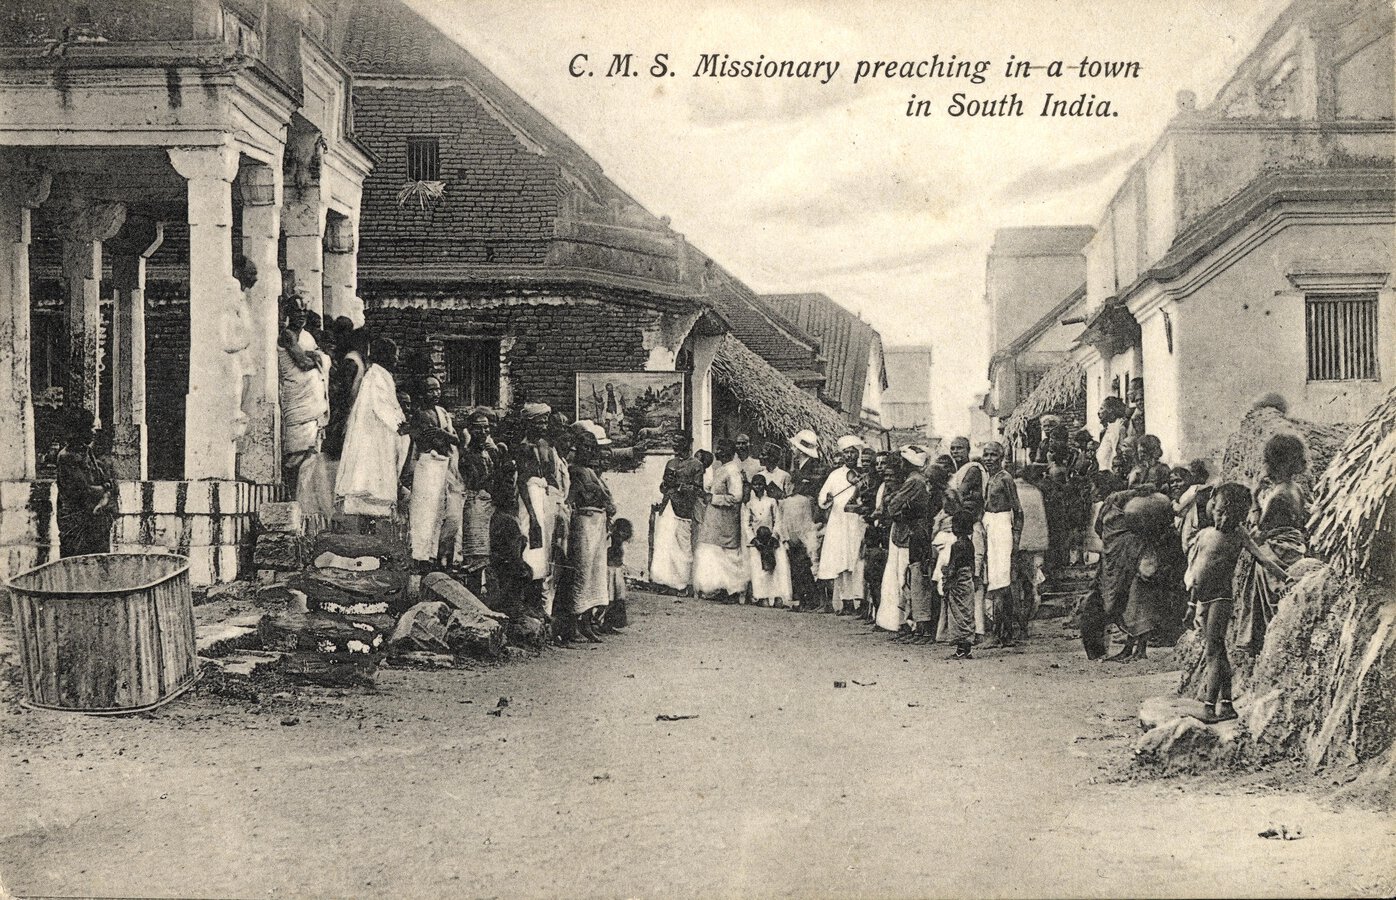 Group of people standing across the width of a street listening to a missionary who is not visible.